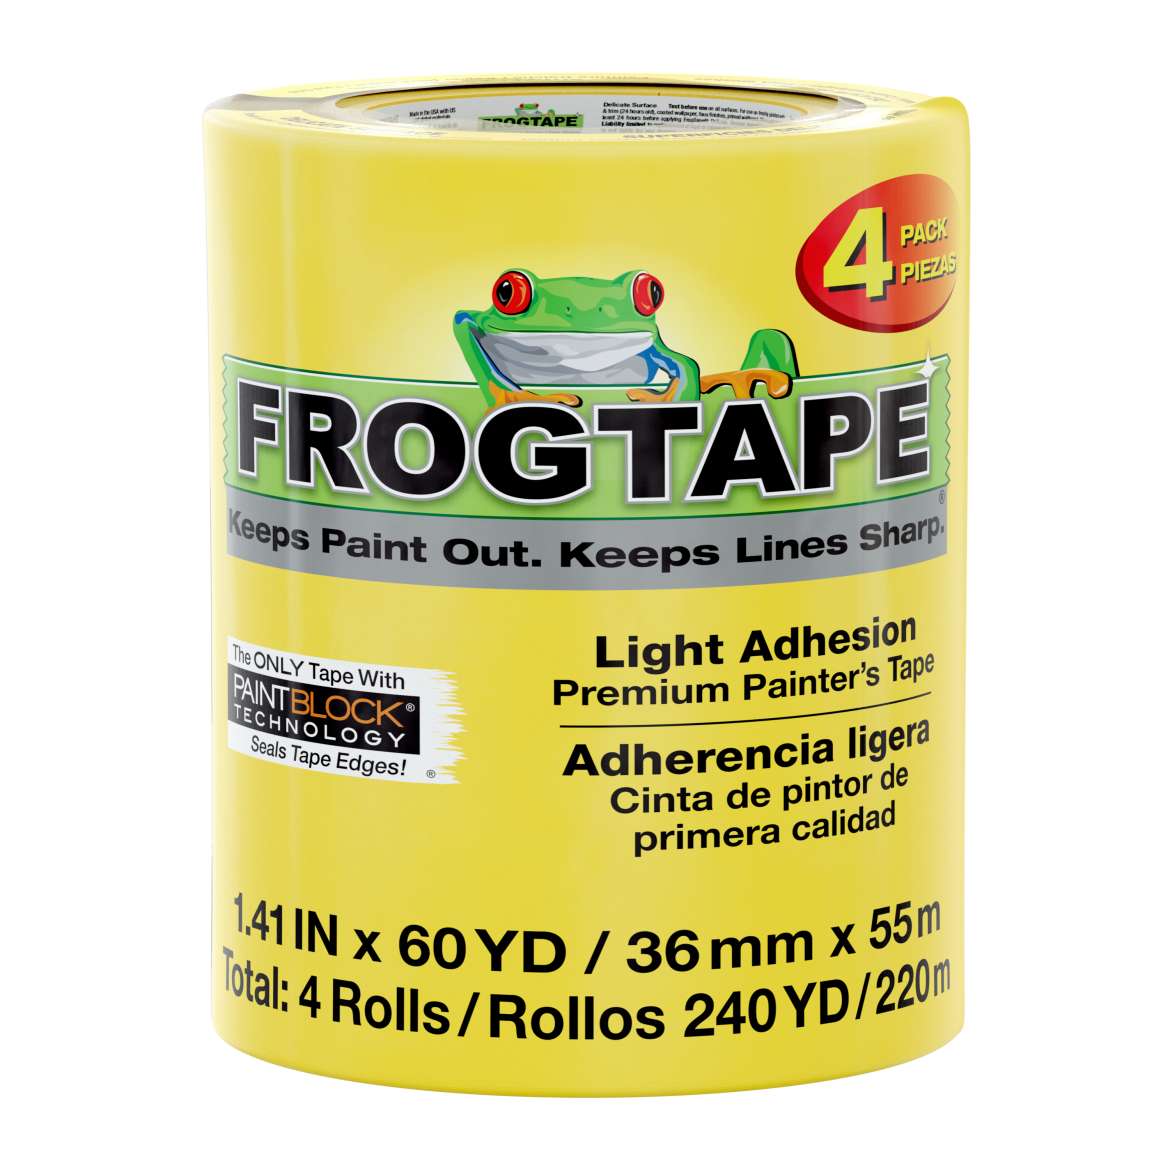 FrogTape® Delicate Surface Painter's Tape - Yellow, 4 pk, 1.41 in. x 60 yd.